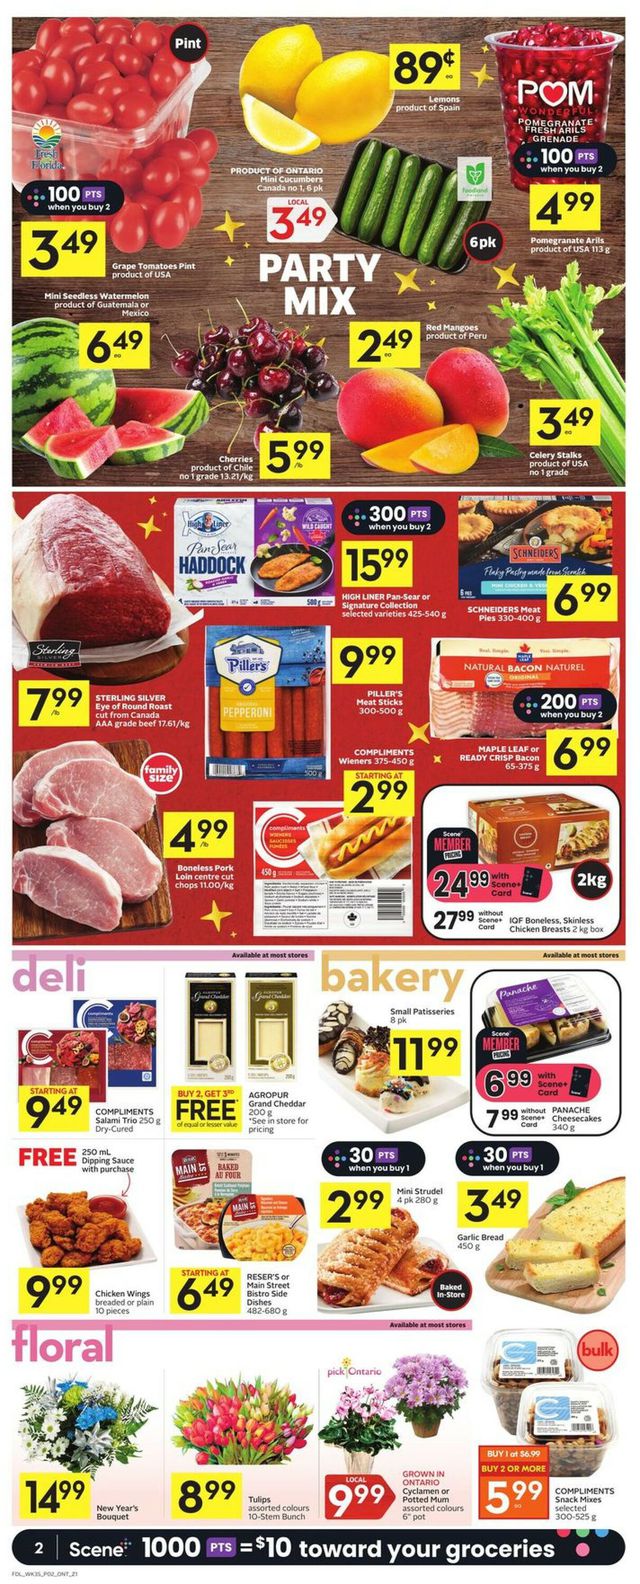 Foodland Flyer from 12/29/2022